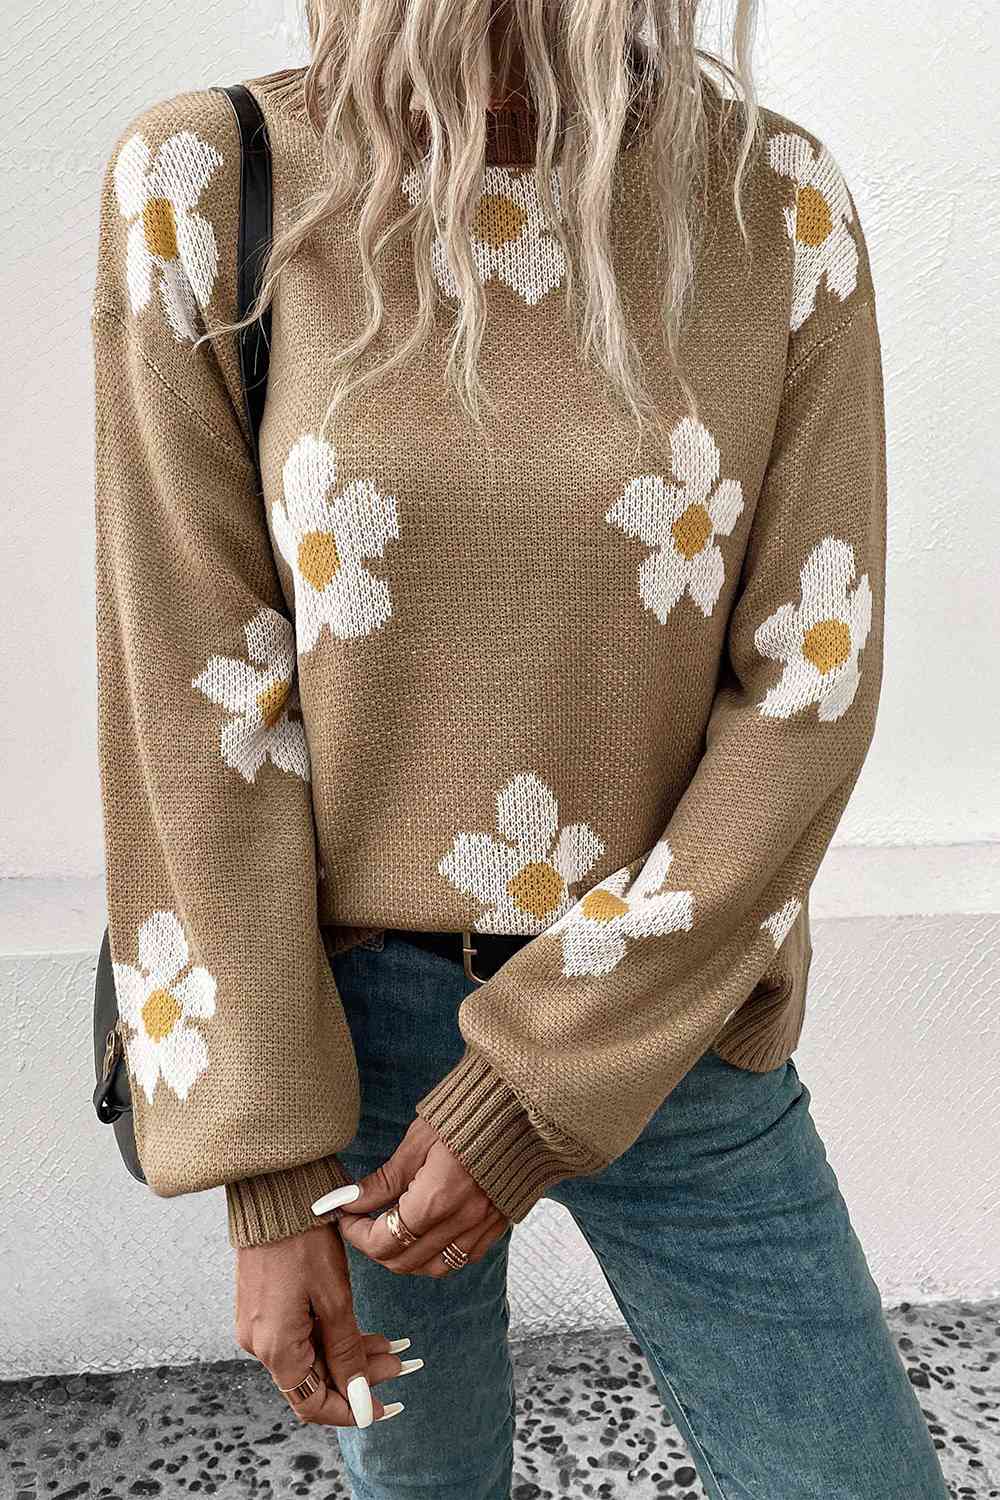 Maeve Floral Sweater